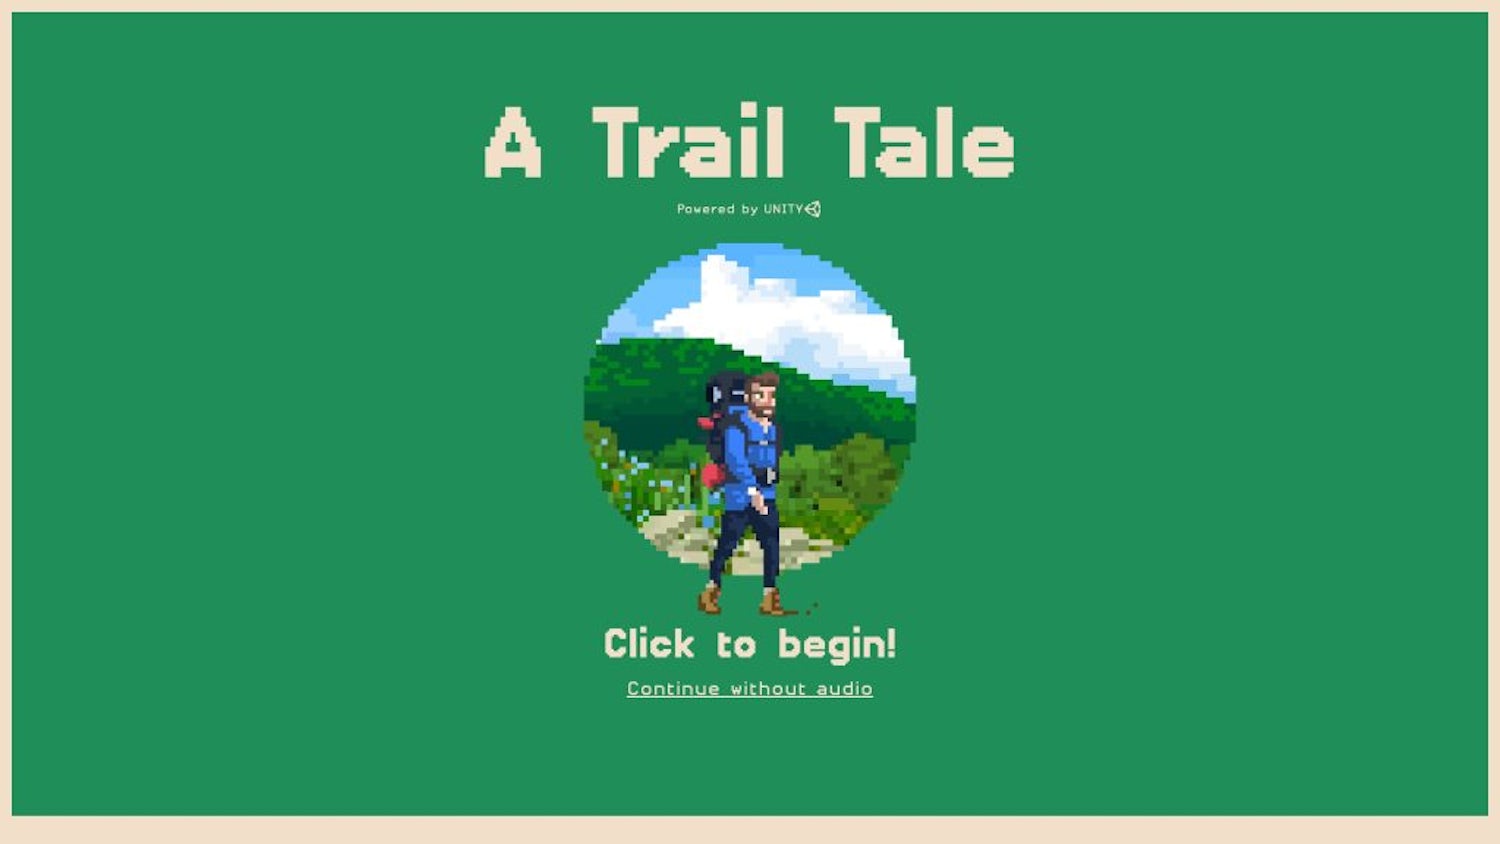 The splash screen for A Trail Tail